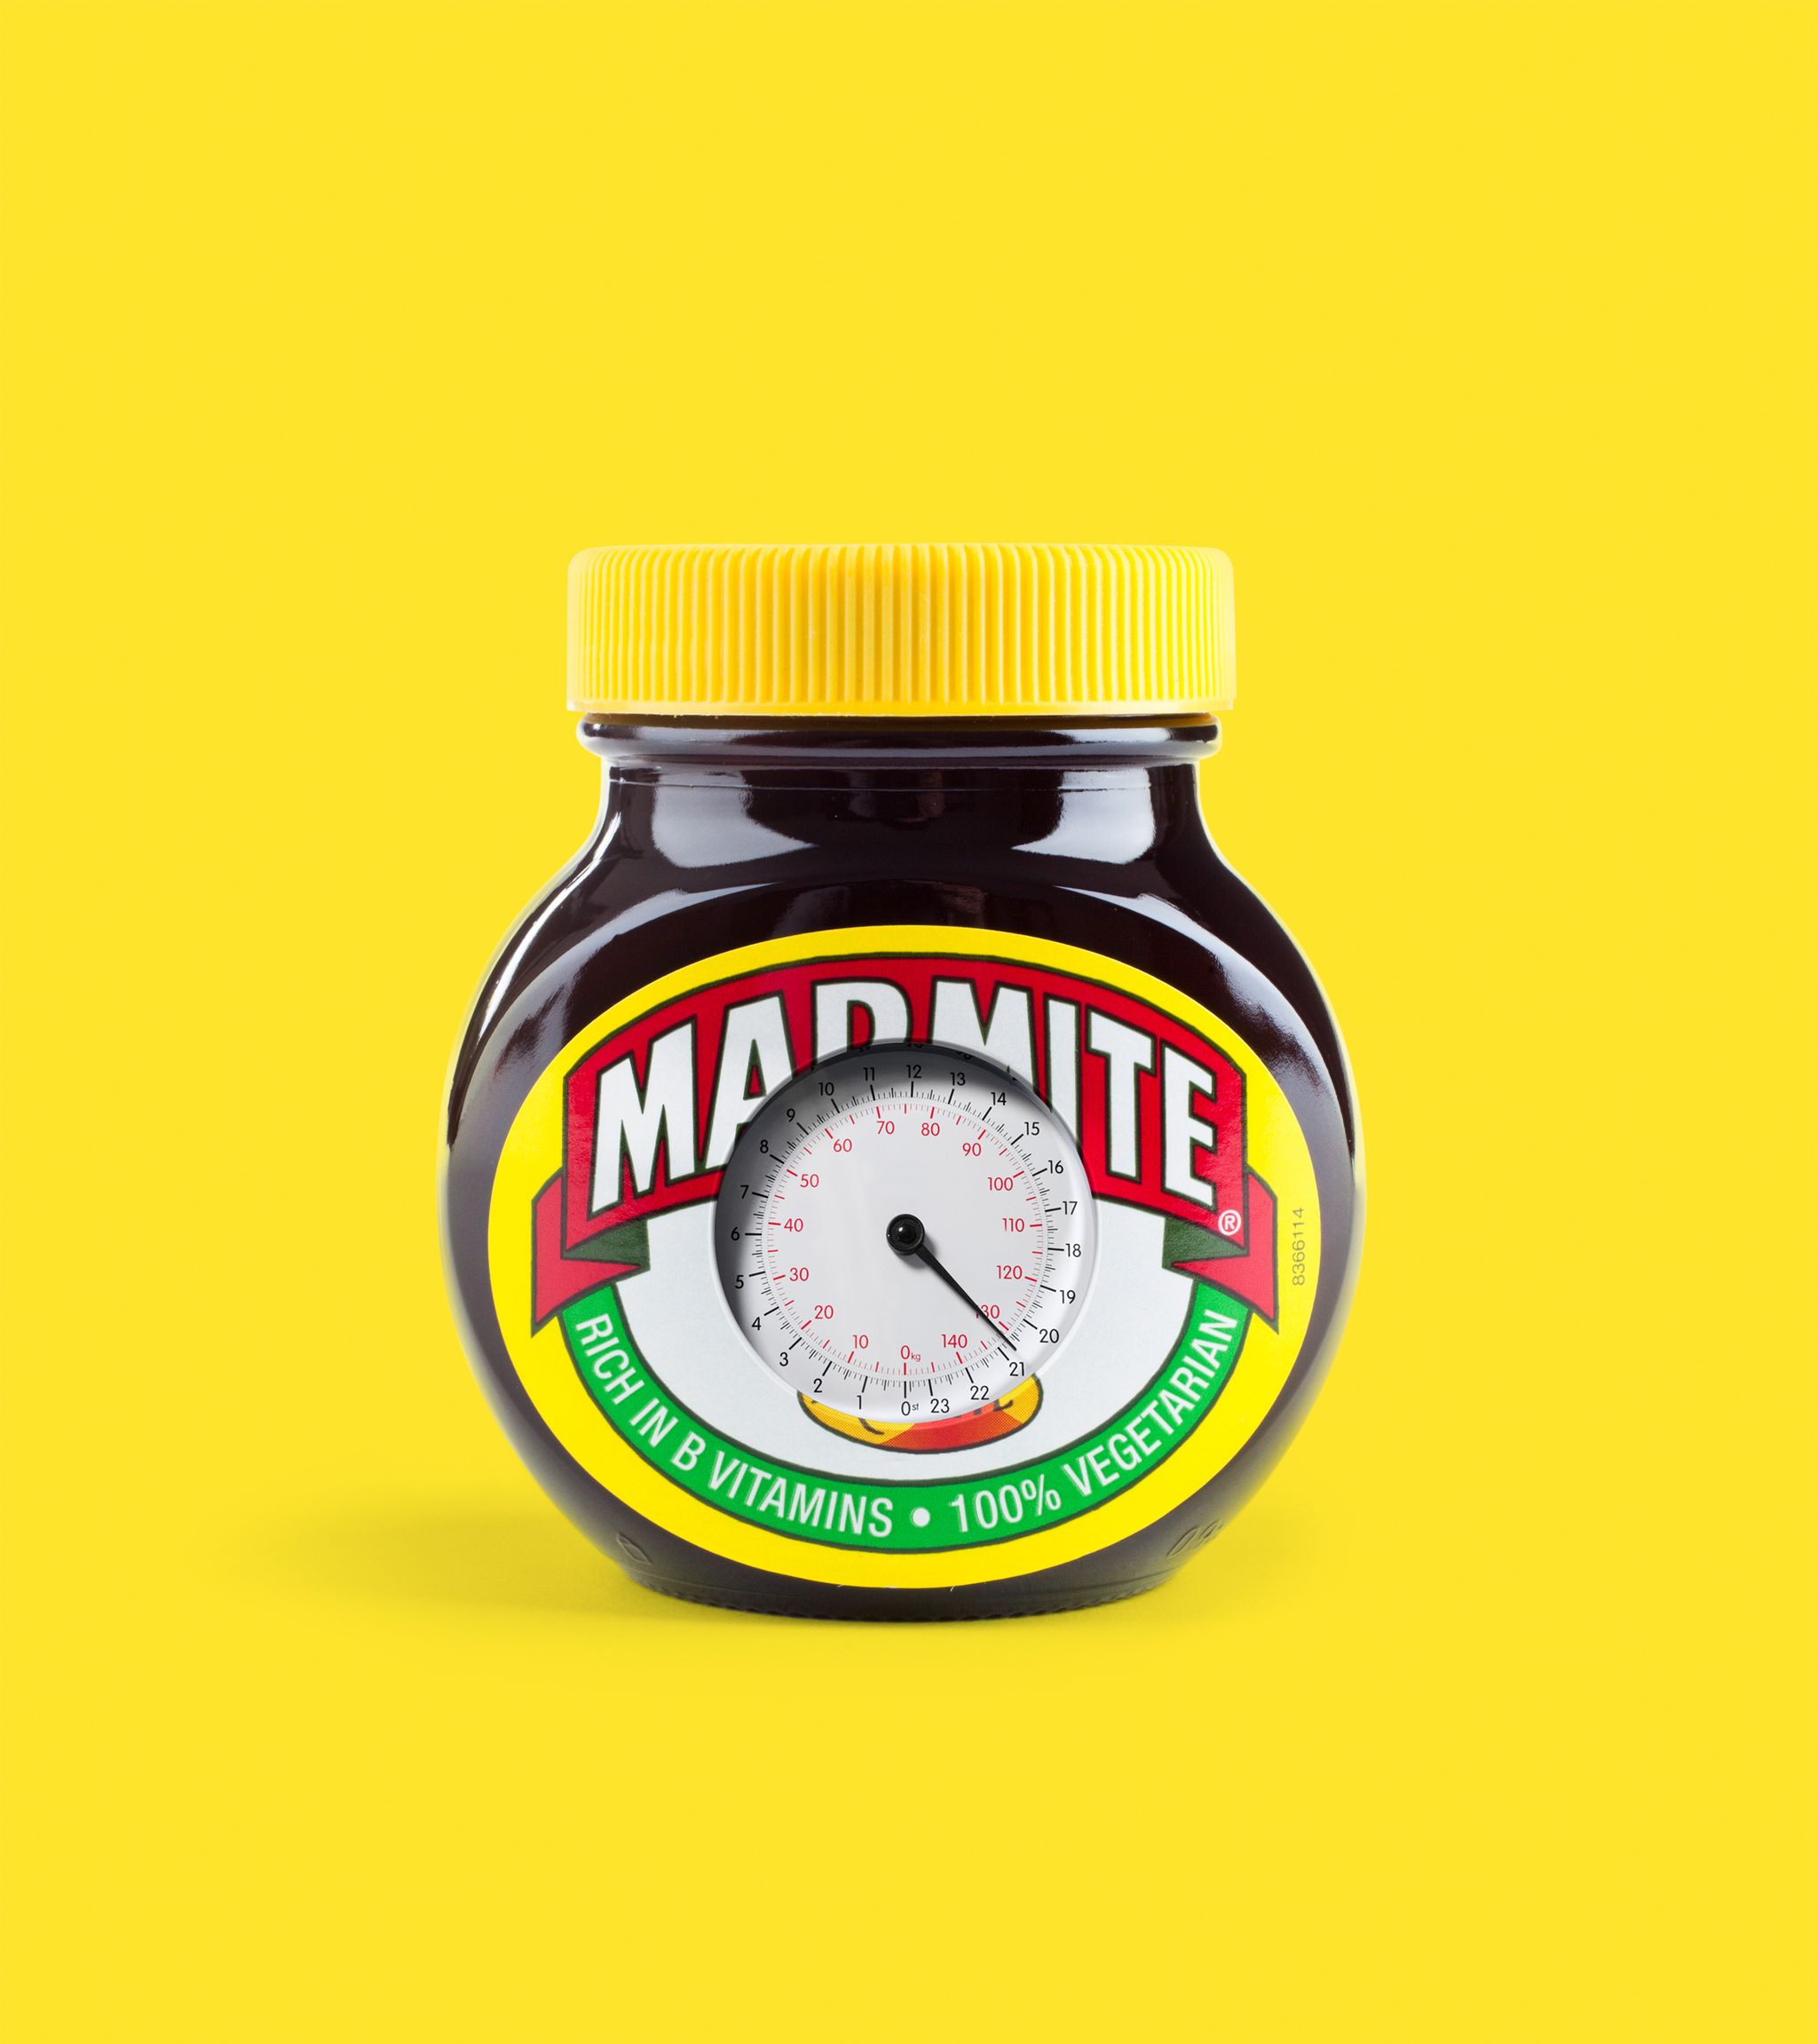 How Marmite Can Help You Eat Healthier